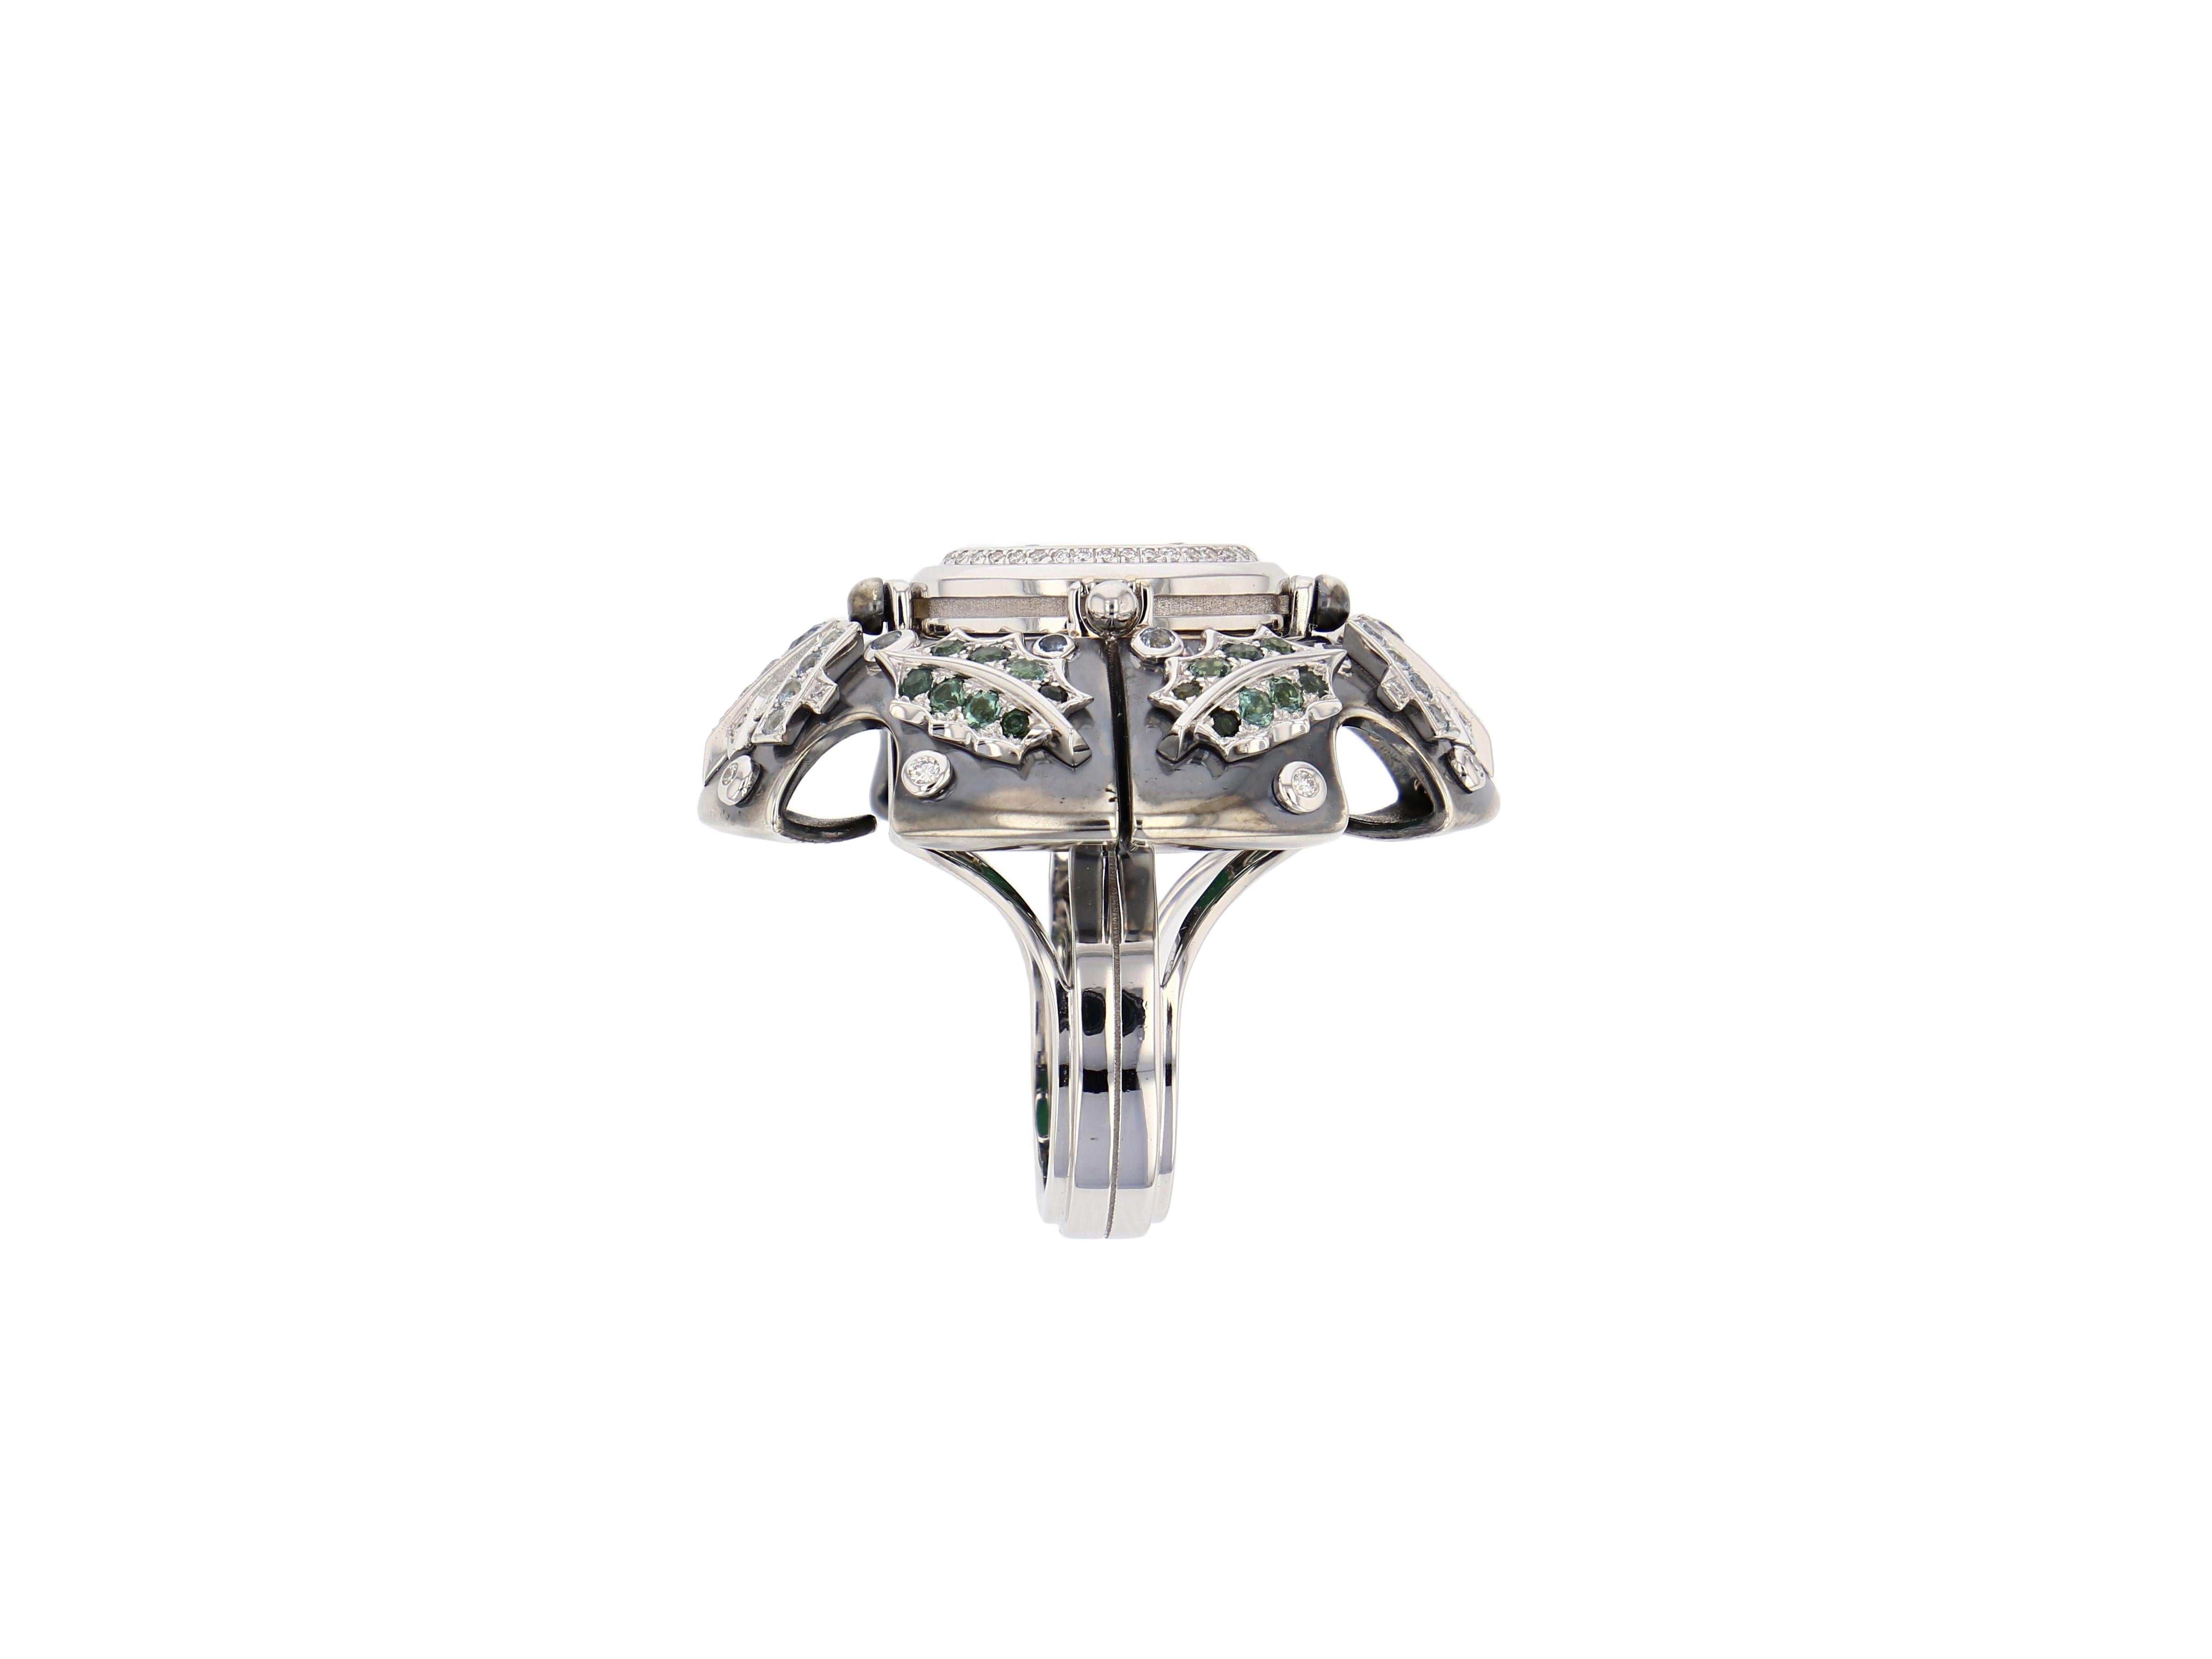 Neoclassical Chrysophrase Eau D'Hiver Ring by Elie Top